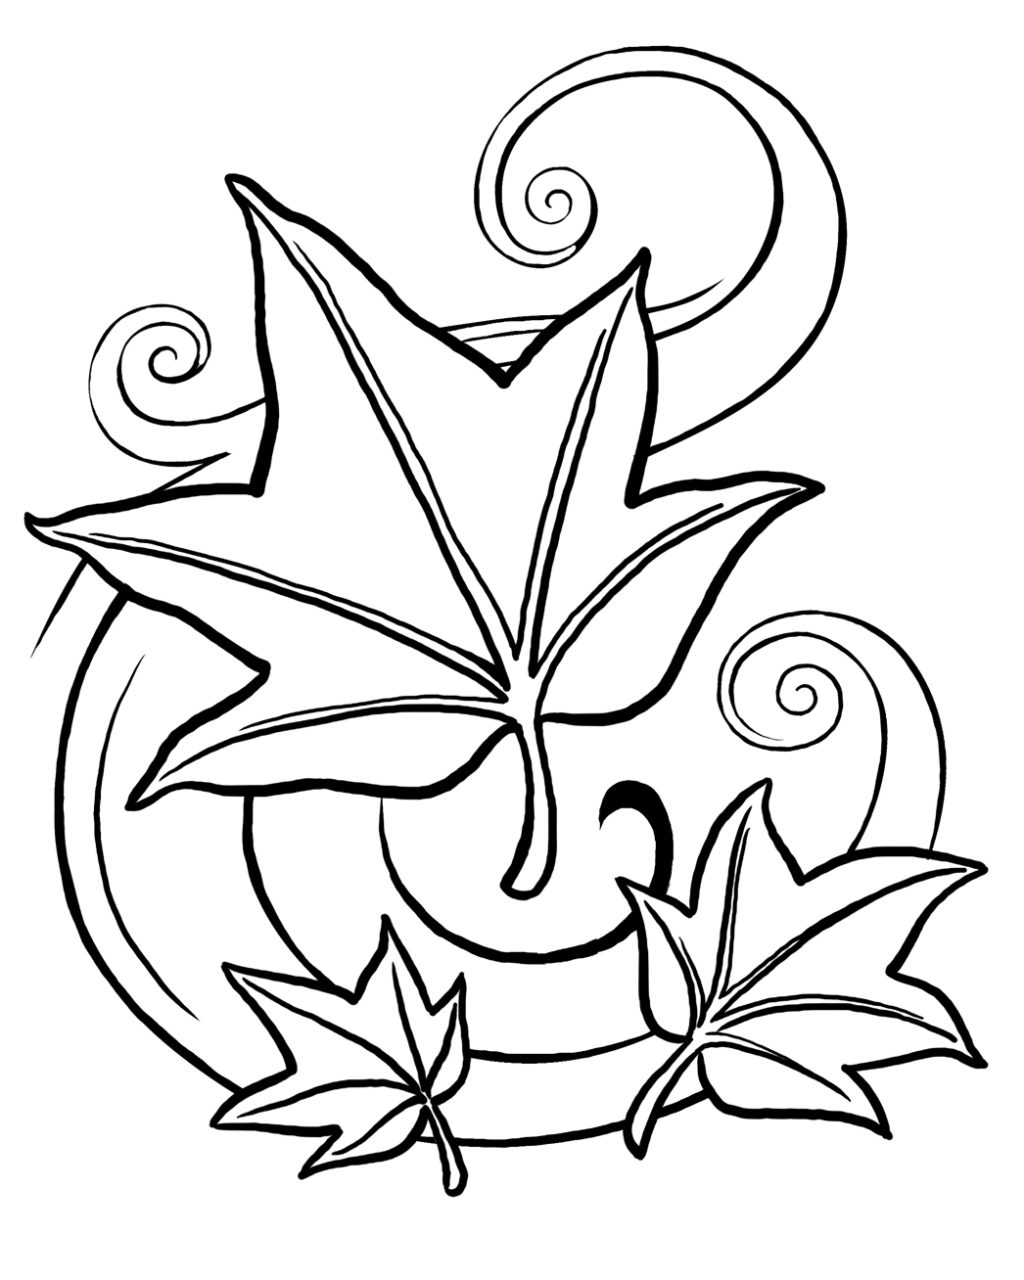 Pot Leaf Coloring Pages at GetColorings.com | Free printable colorings